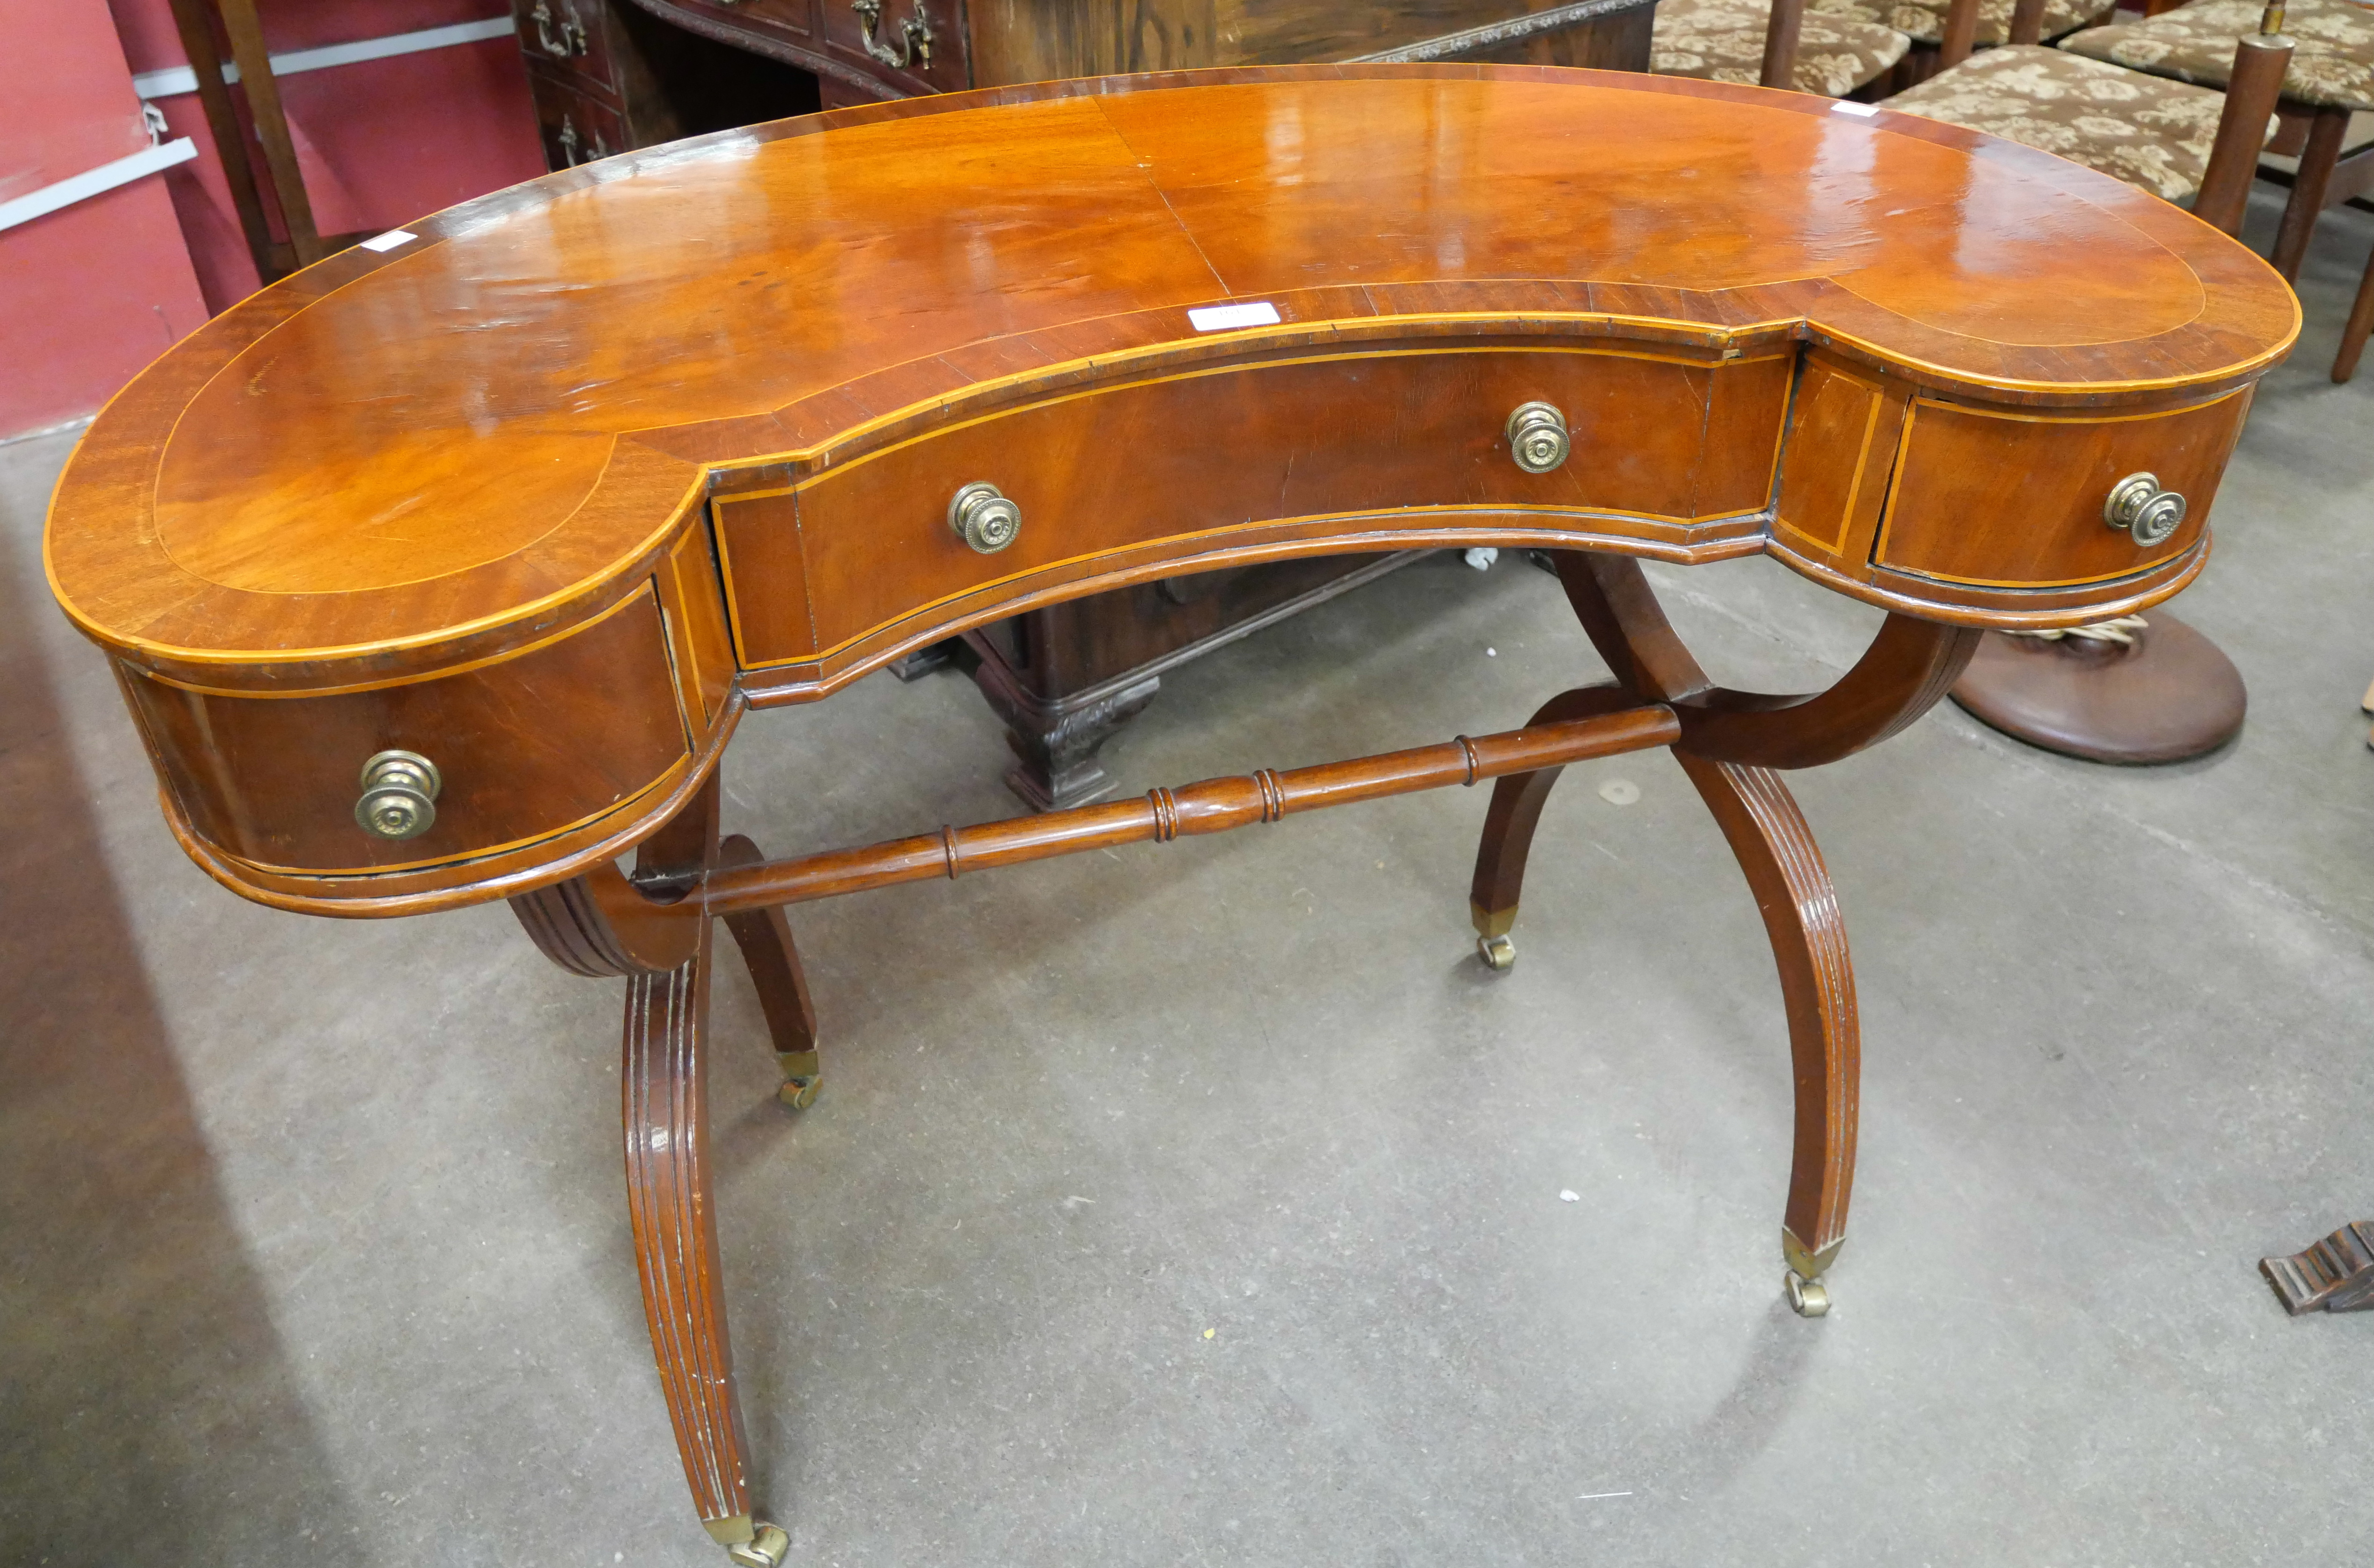 A Regency style inlaid kidney shaped writing table